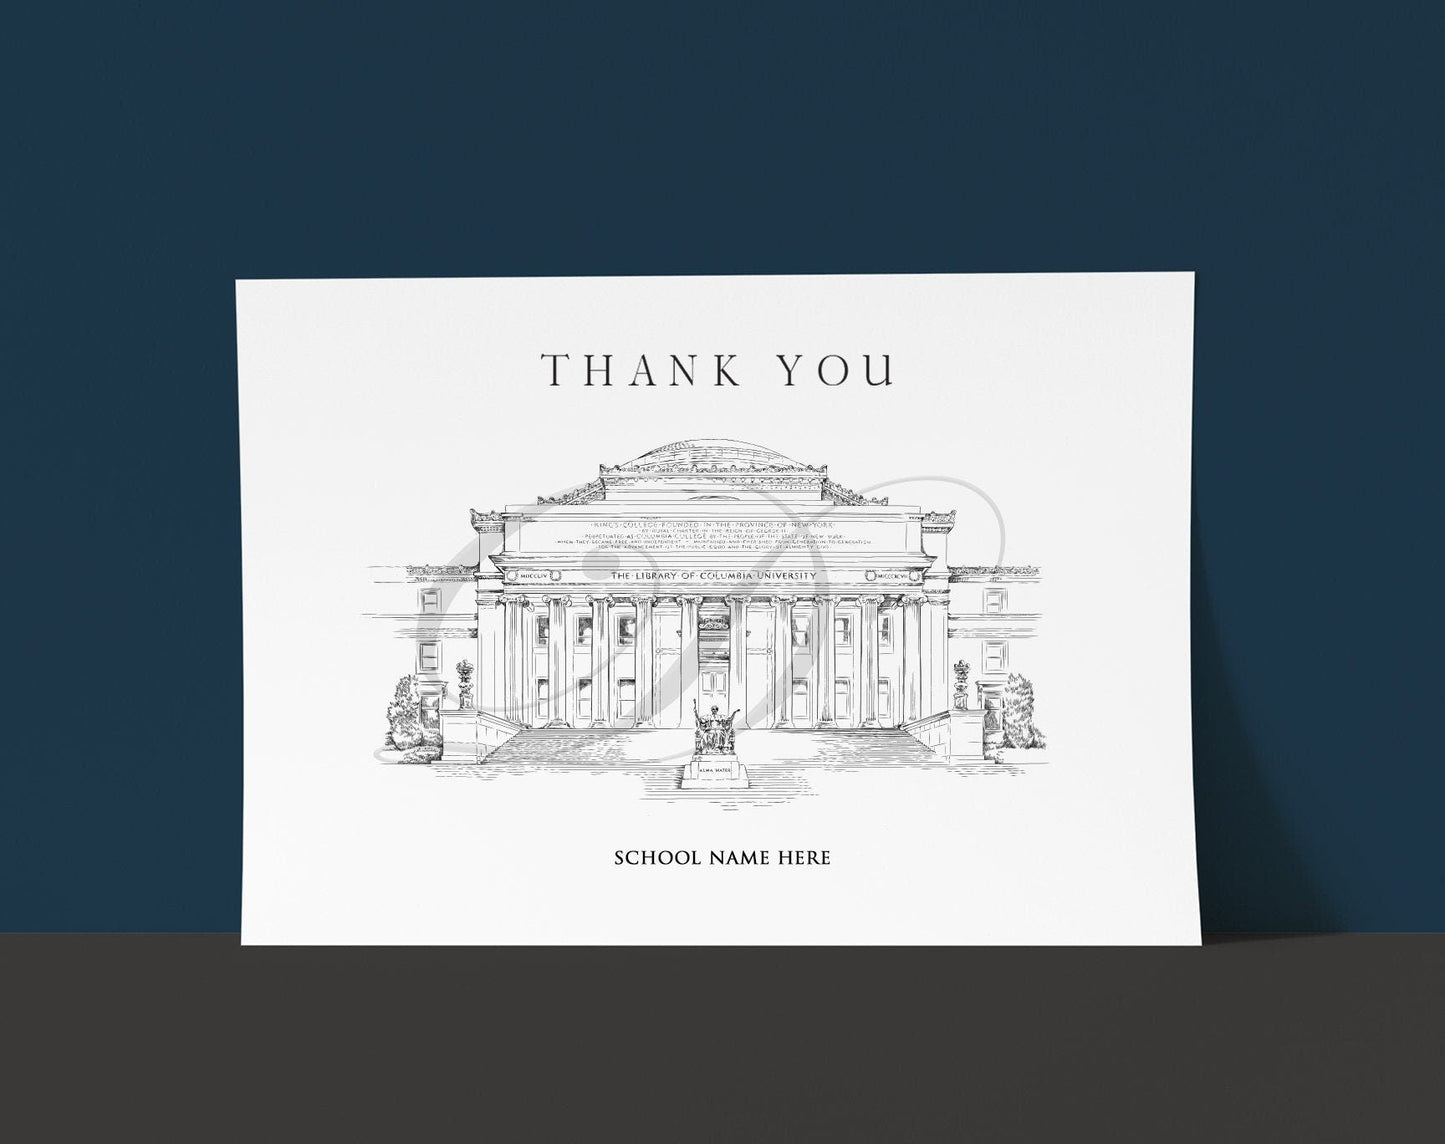 Columbia University Graduation Thank You Cards, New York, nyc, Thank You Card, Grads, Alumni, Note Cards, Graduation Gift ( Set of 25)